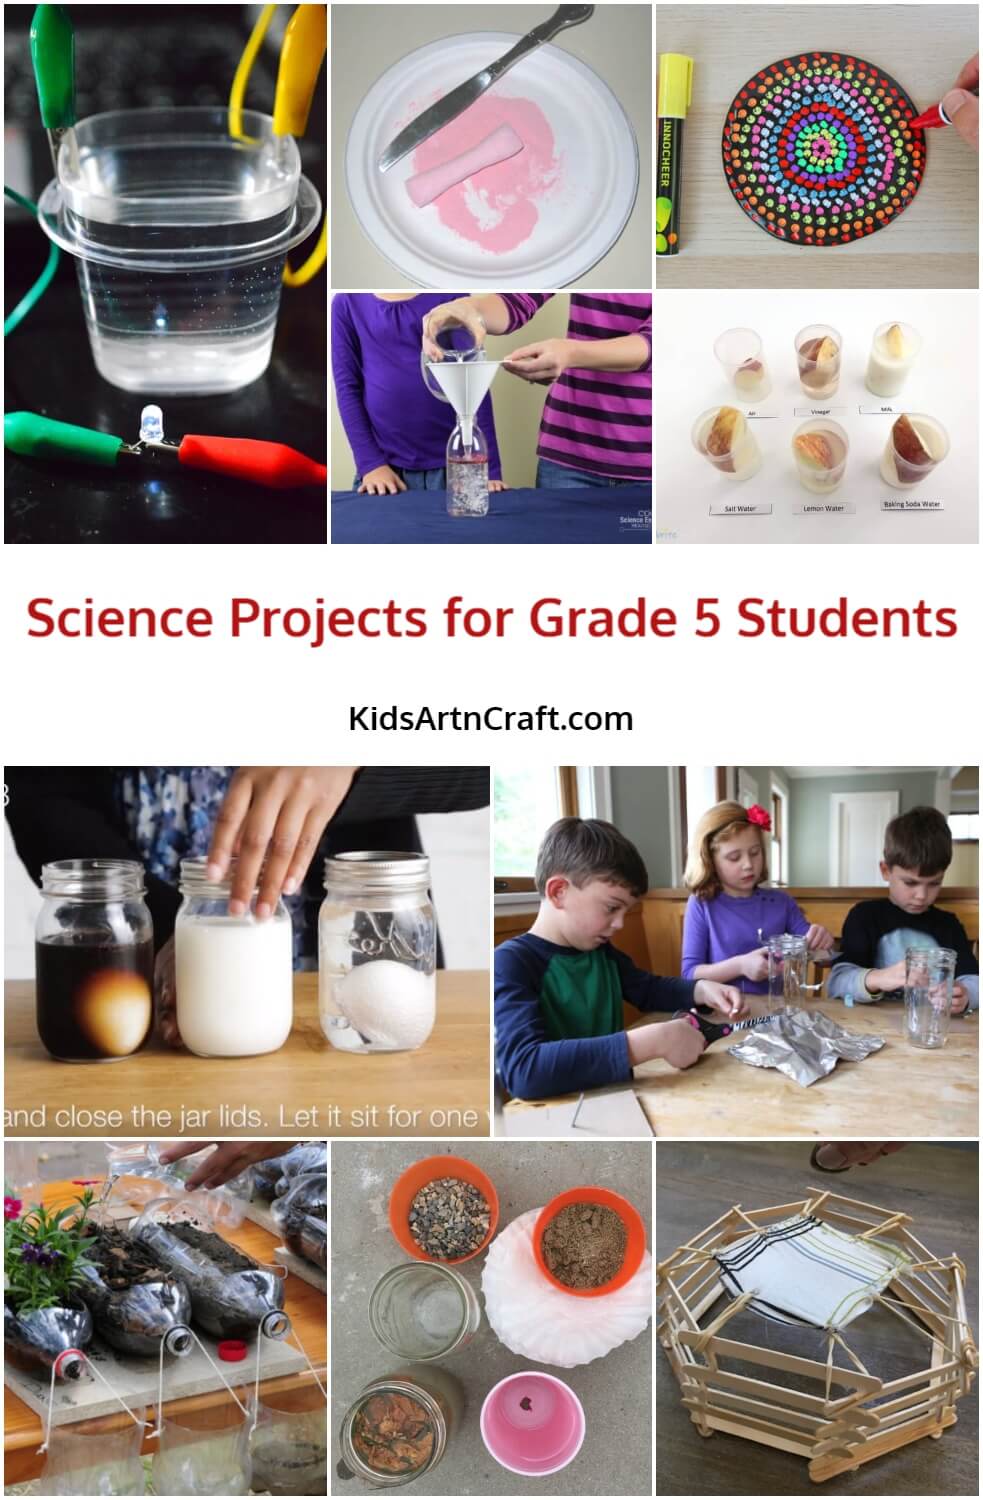 Science Projects for Grade 5 Students